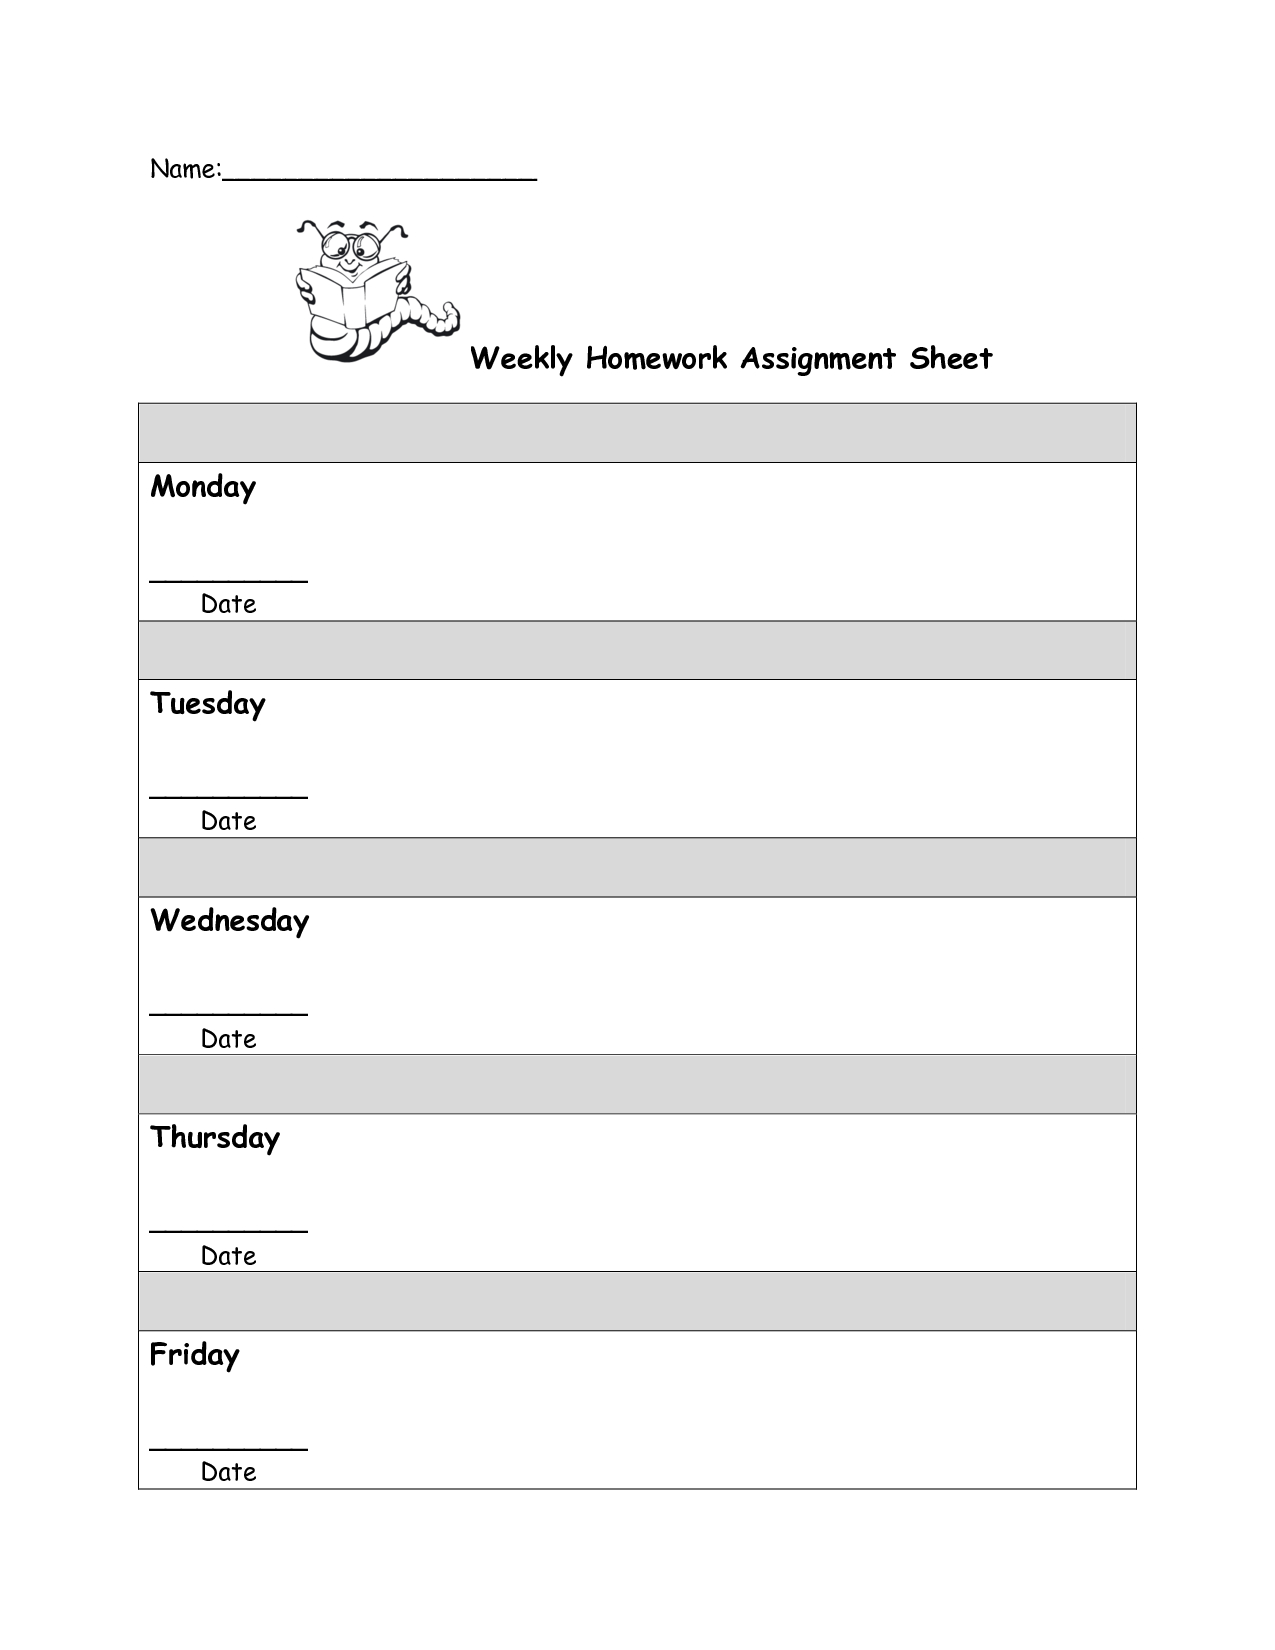 images of assignment sheets